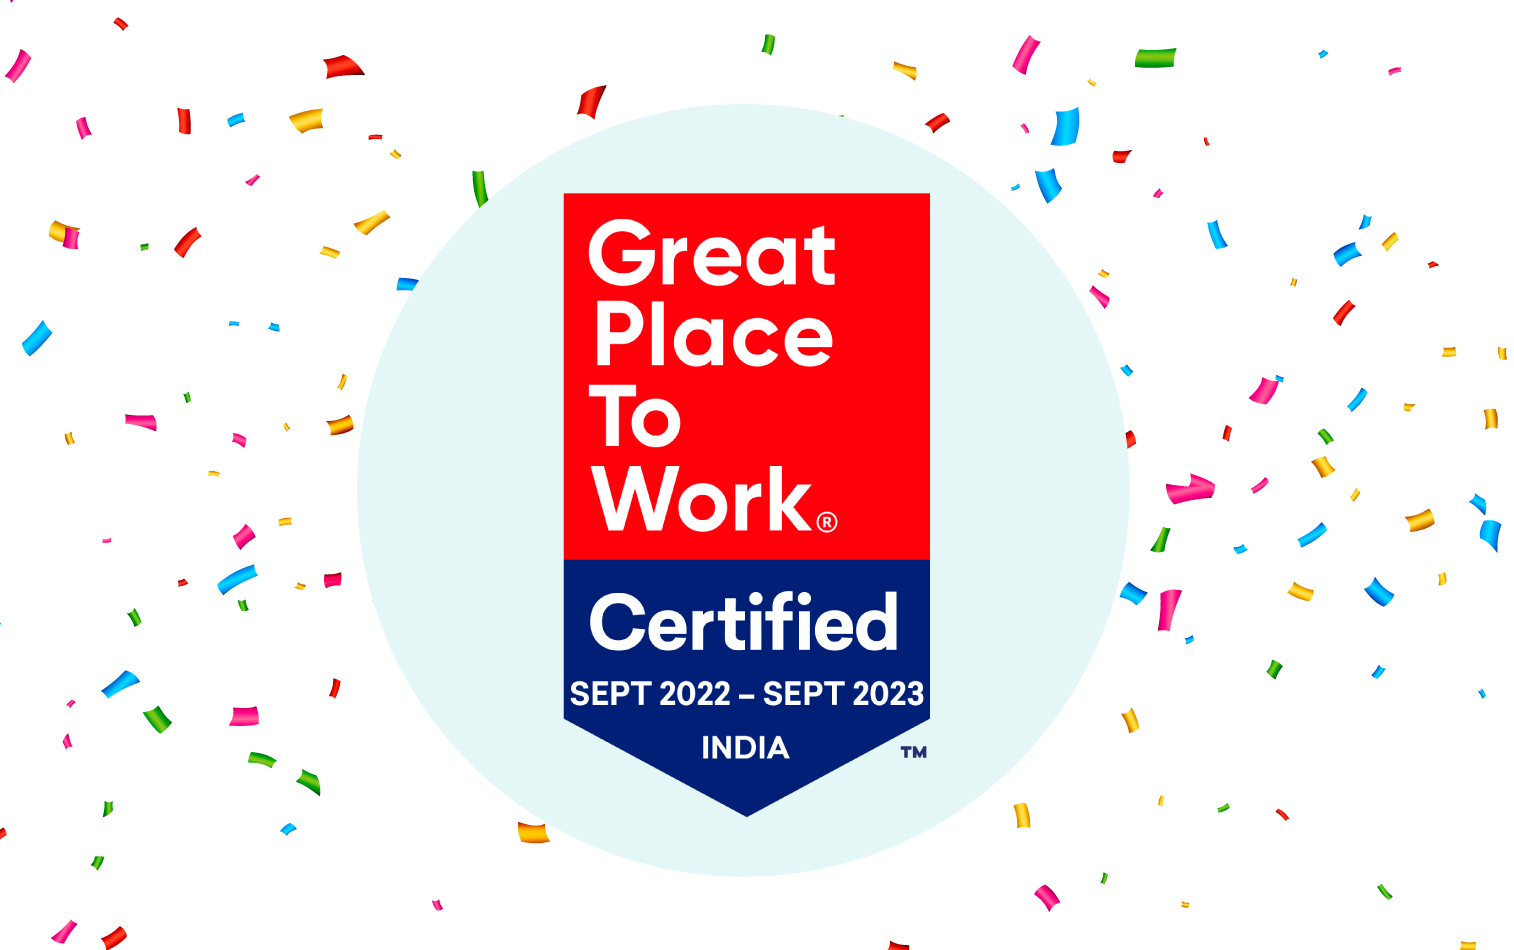 Tata Steel certified 'Great Place to Work' for sixth consecutive time